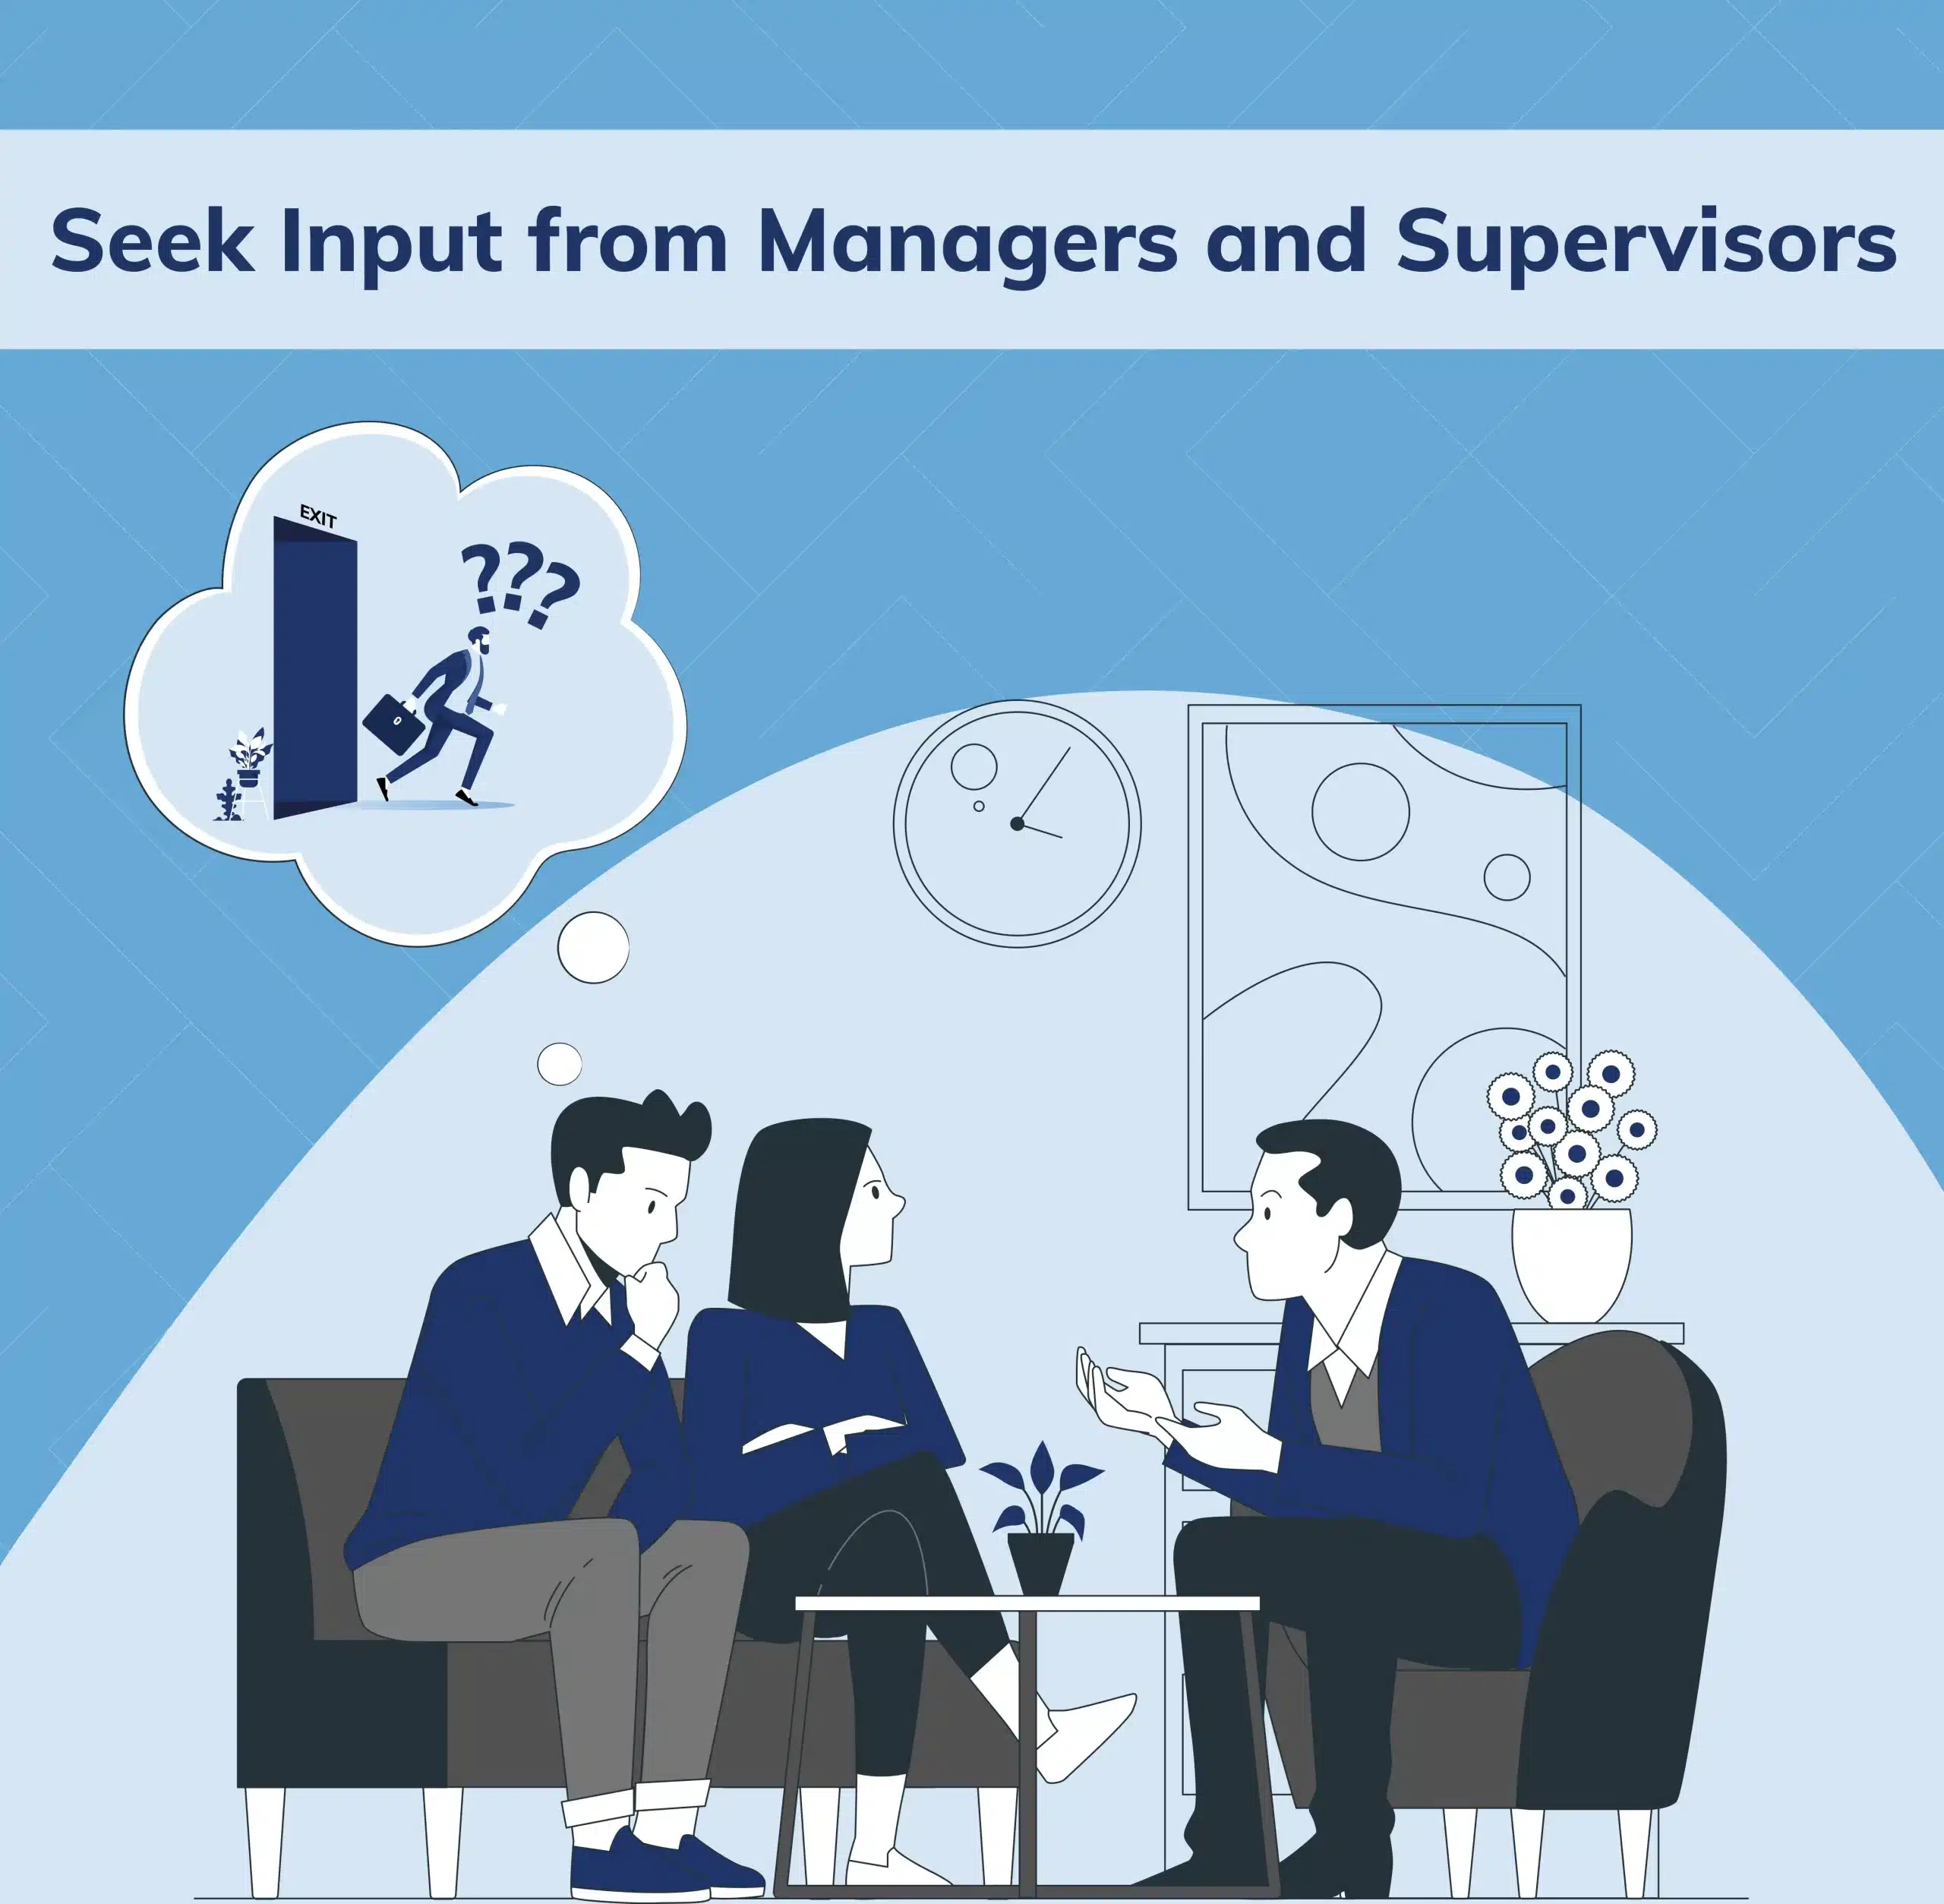 Inputs from managers